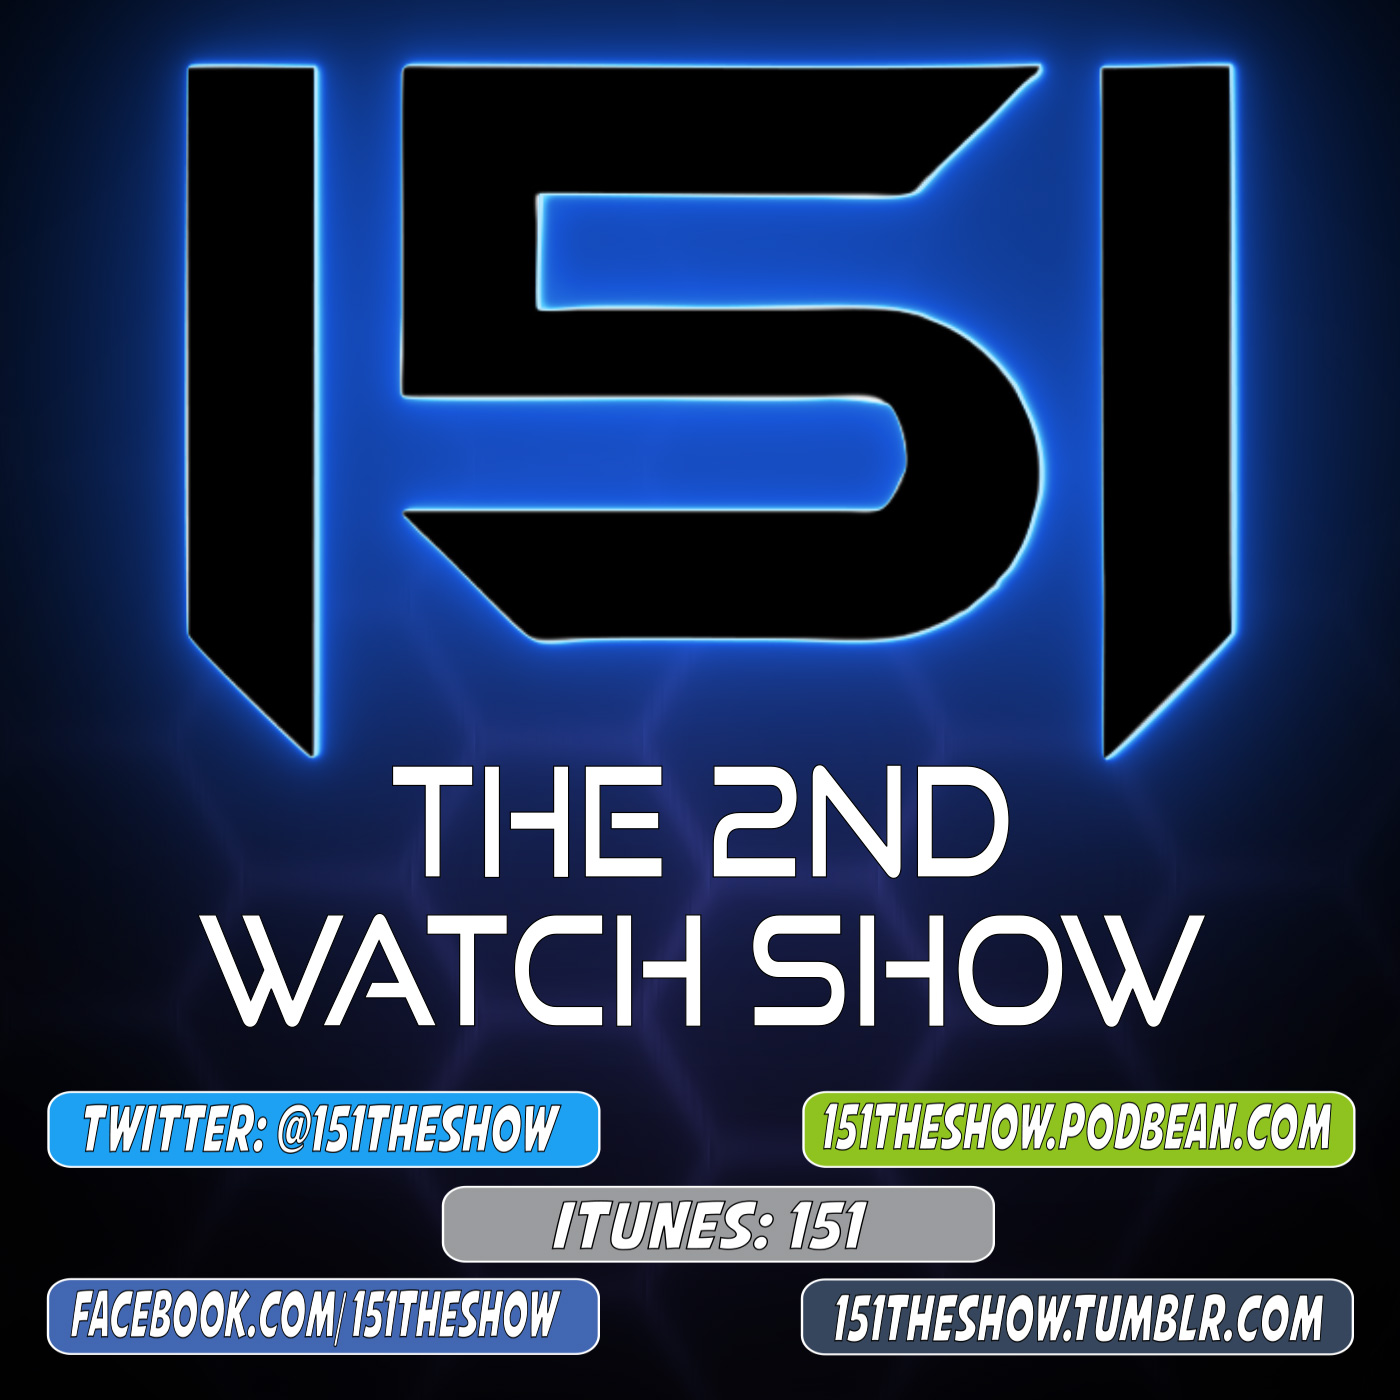 The 2nd Watch Show